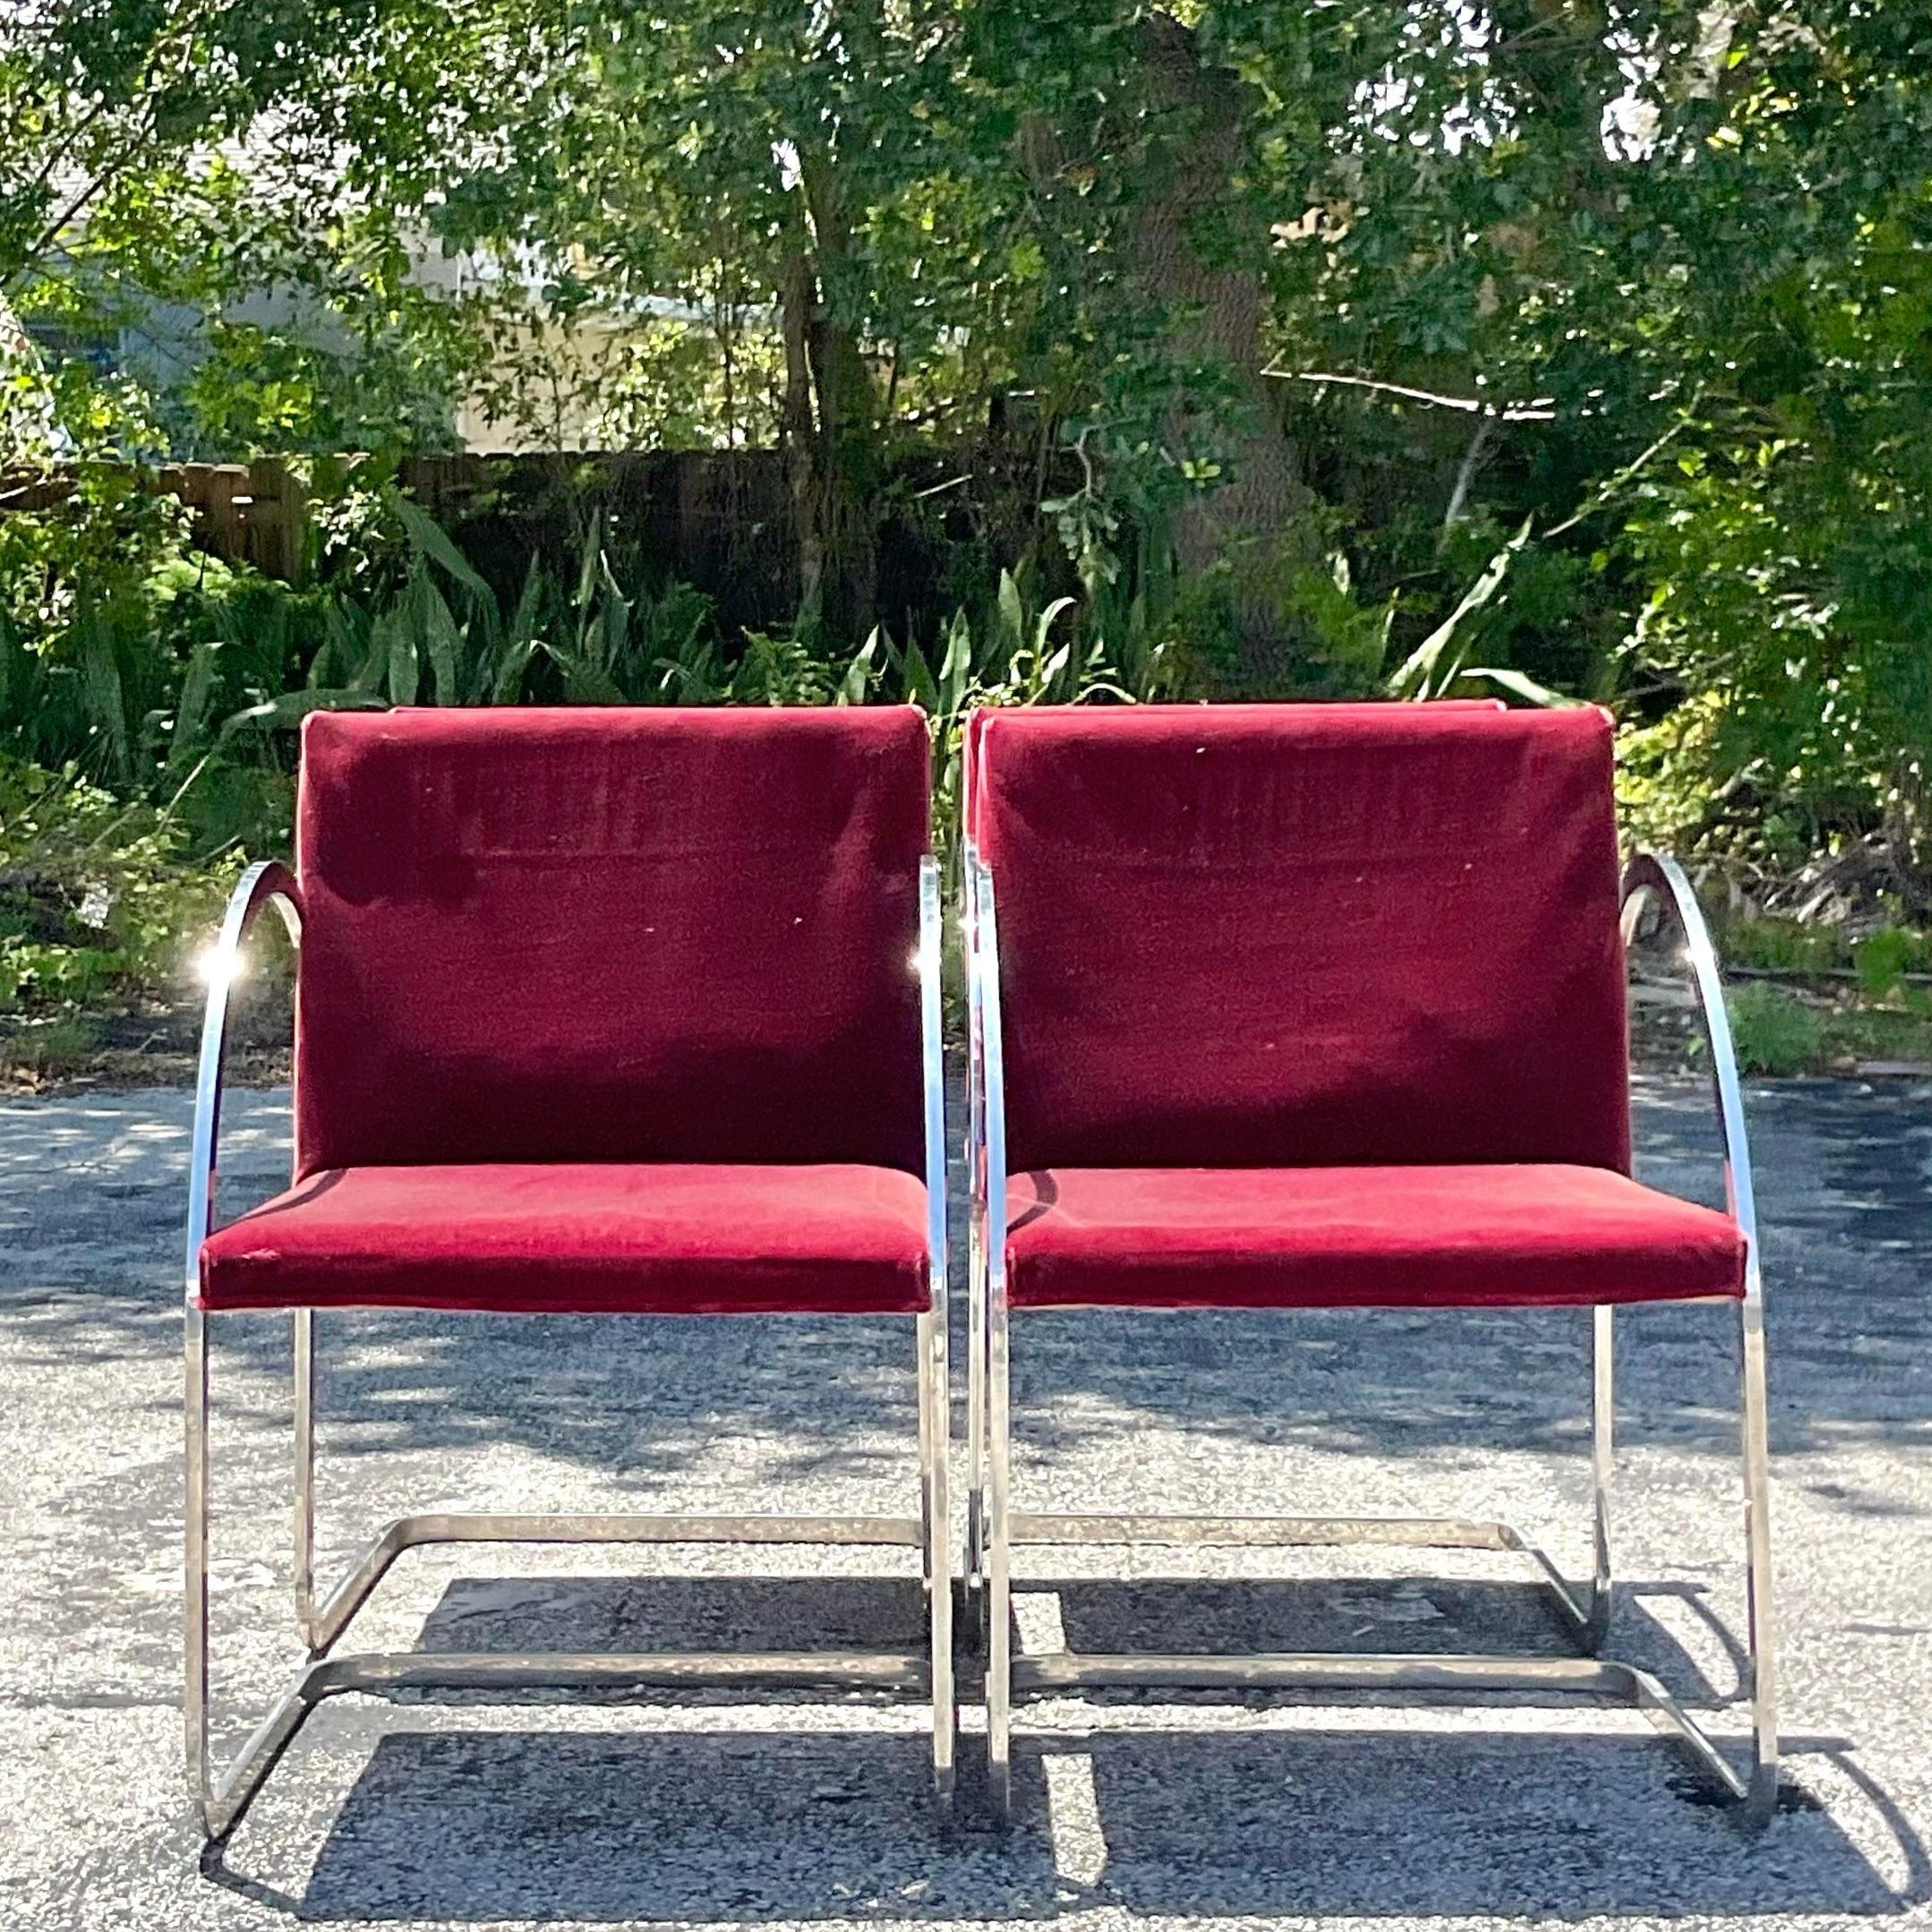 Vintage Boho Brueton Polished Chrome Dining Chairs - Set of 4 In Good Condition For Sale In west palm beach, FL